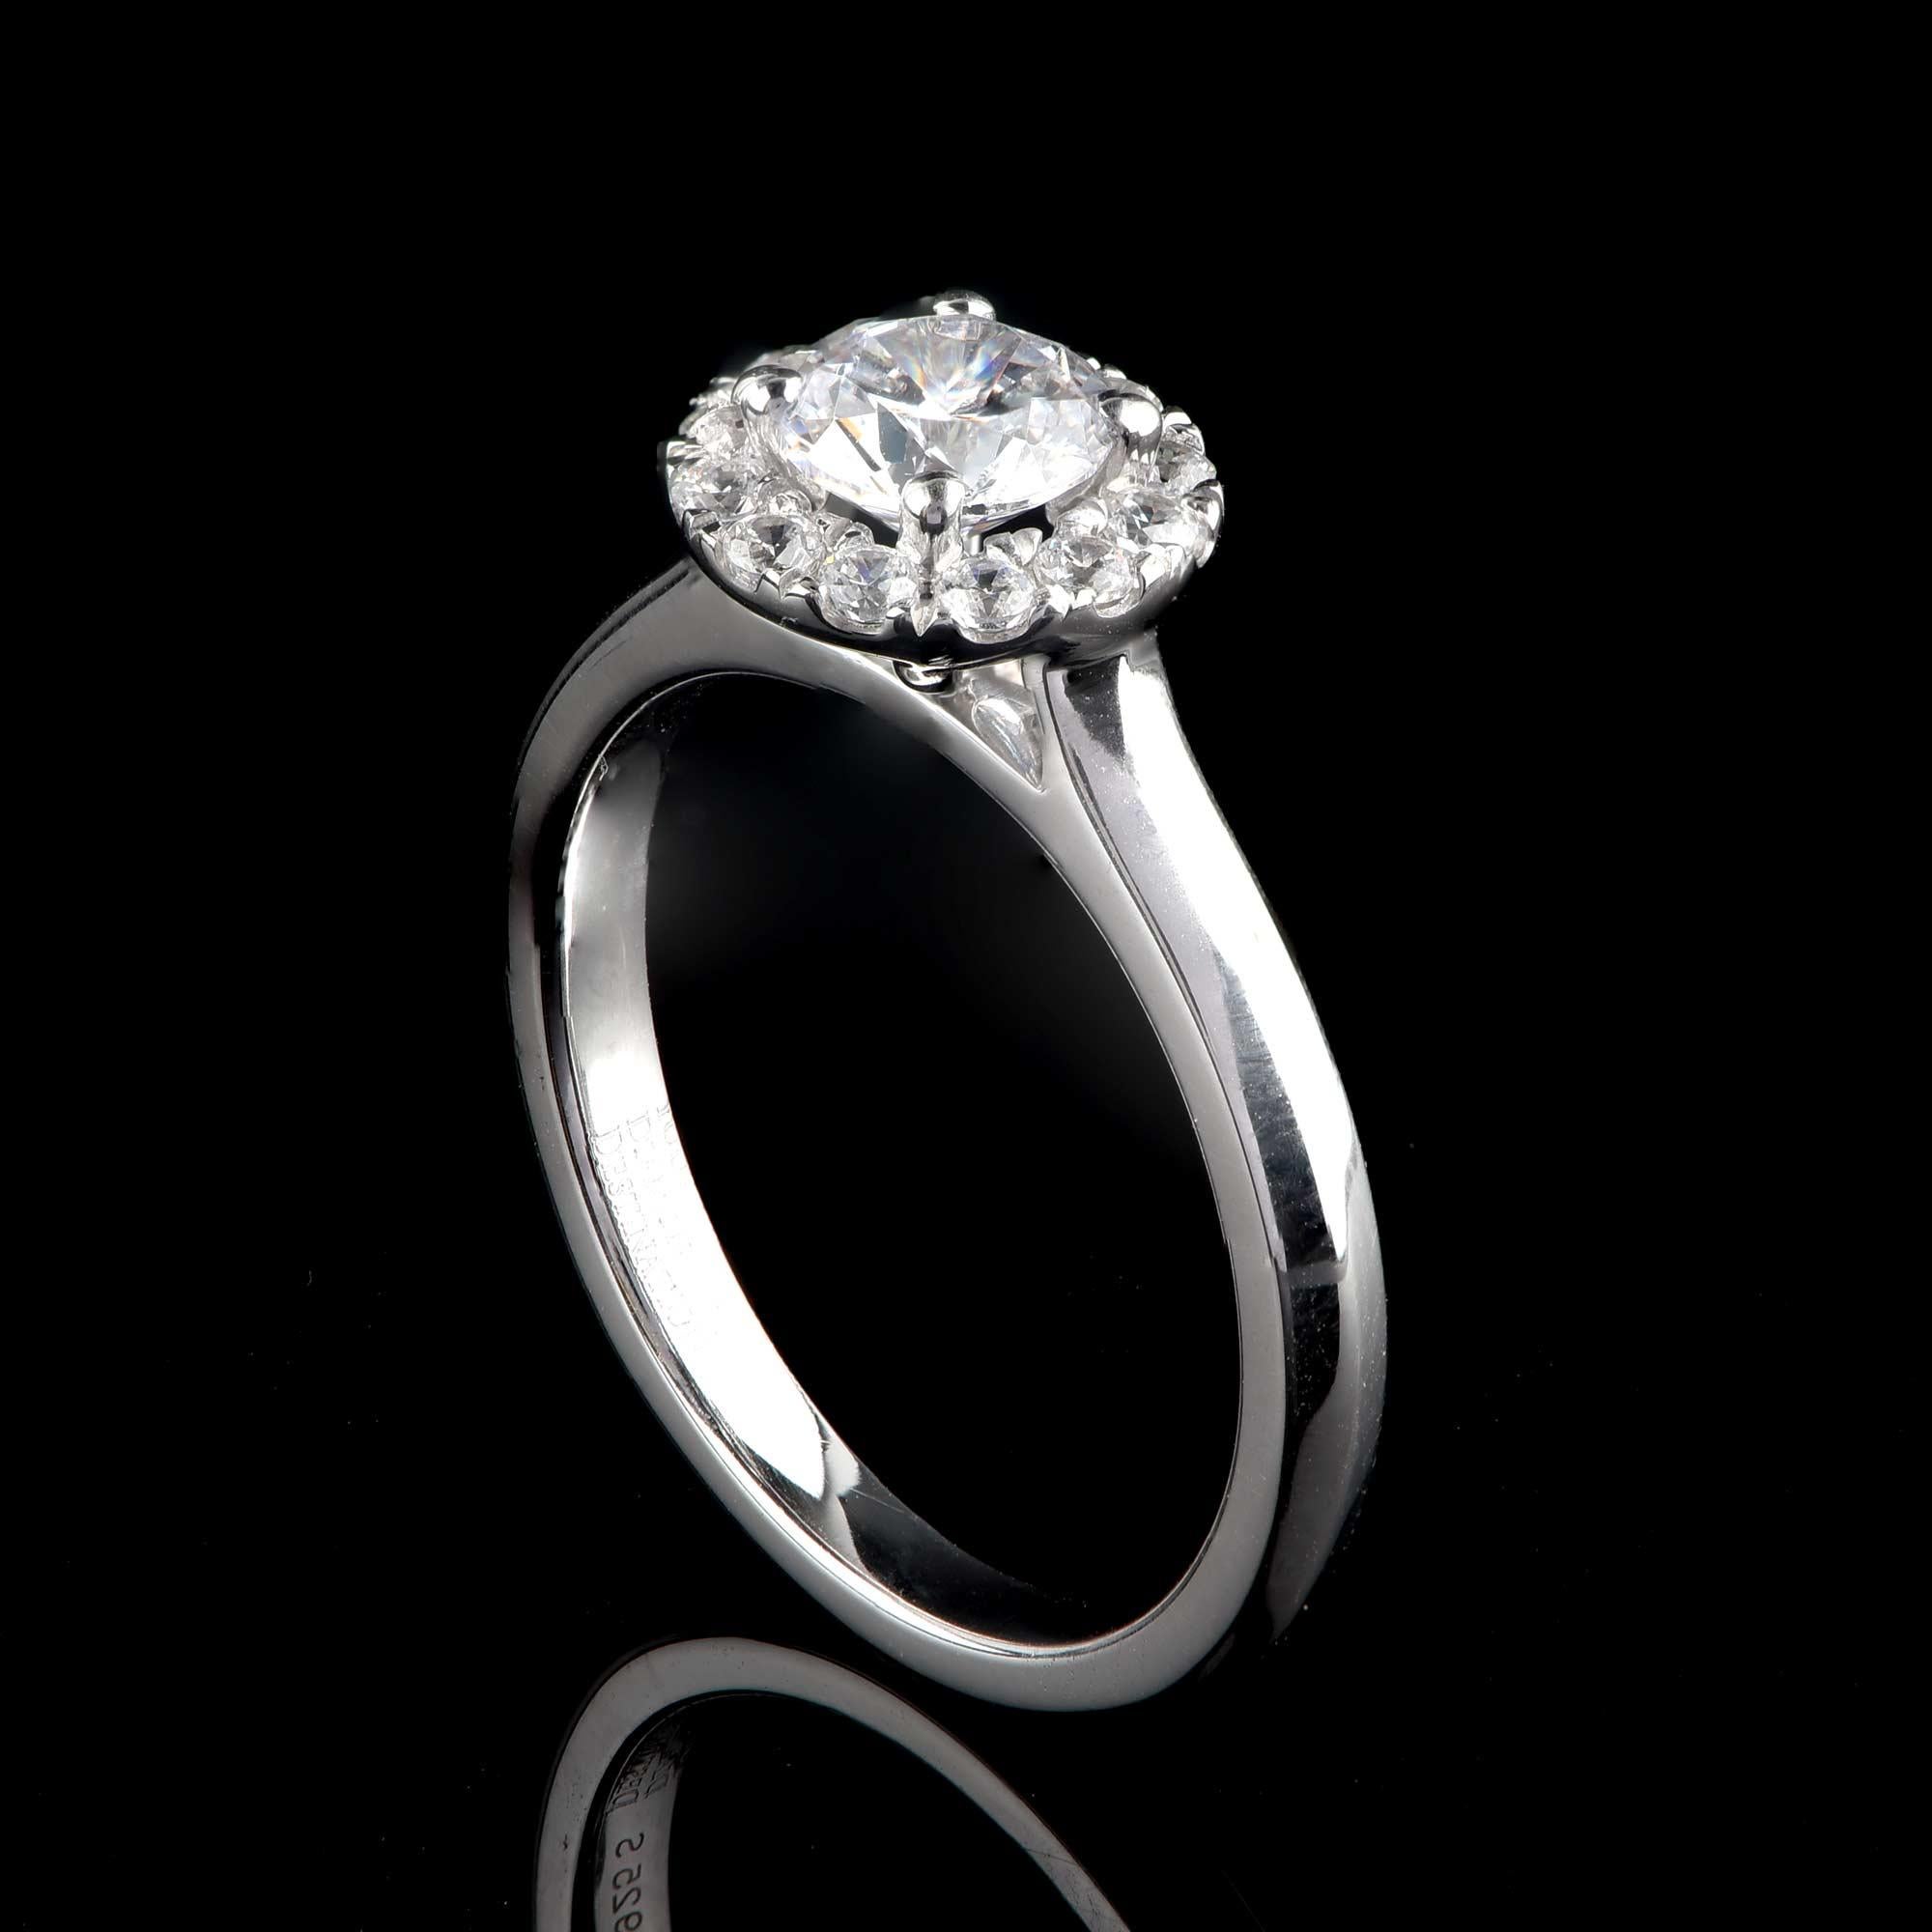 This bridal ring is intricately crafted by our in-house experts in 18-karat white gold and is studded with 12 brilliant-cut diamonds and 1 GIA Certified 0.70ct center stone in prong setting. The diamonds are graded H Color, SI1 Clarity. 

Metal